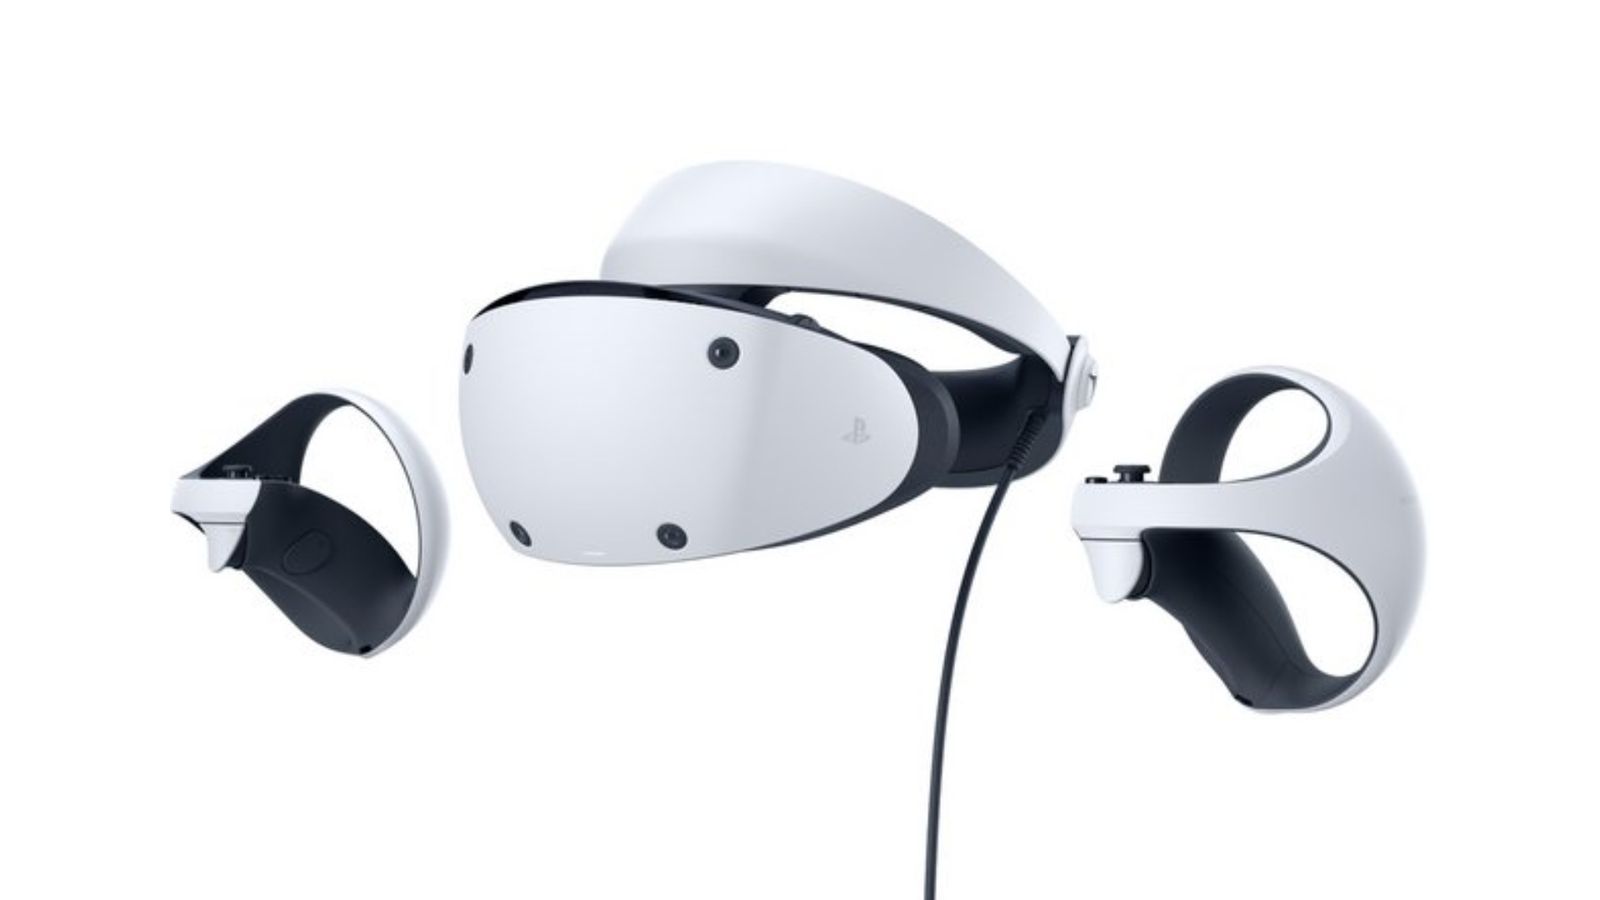 PlayStation VR2 product image of a white and black VR headset with two circular controllers.